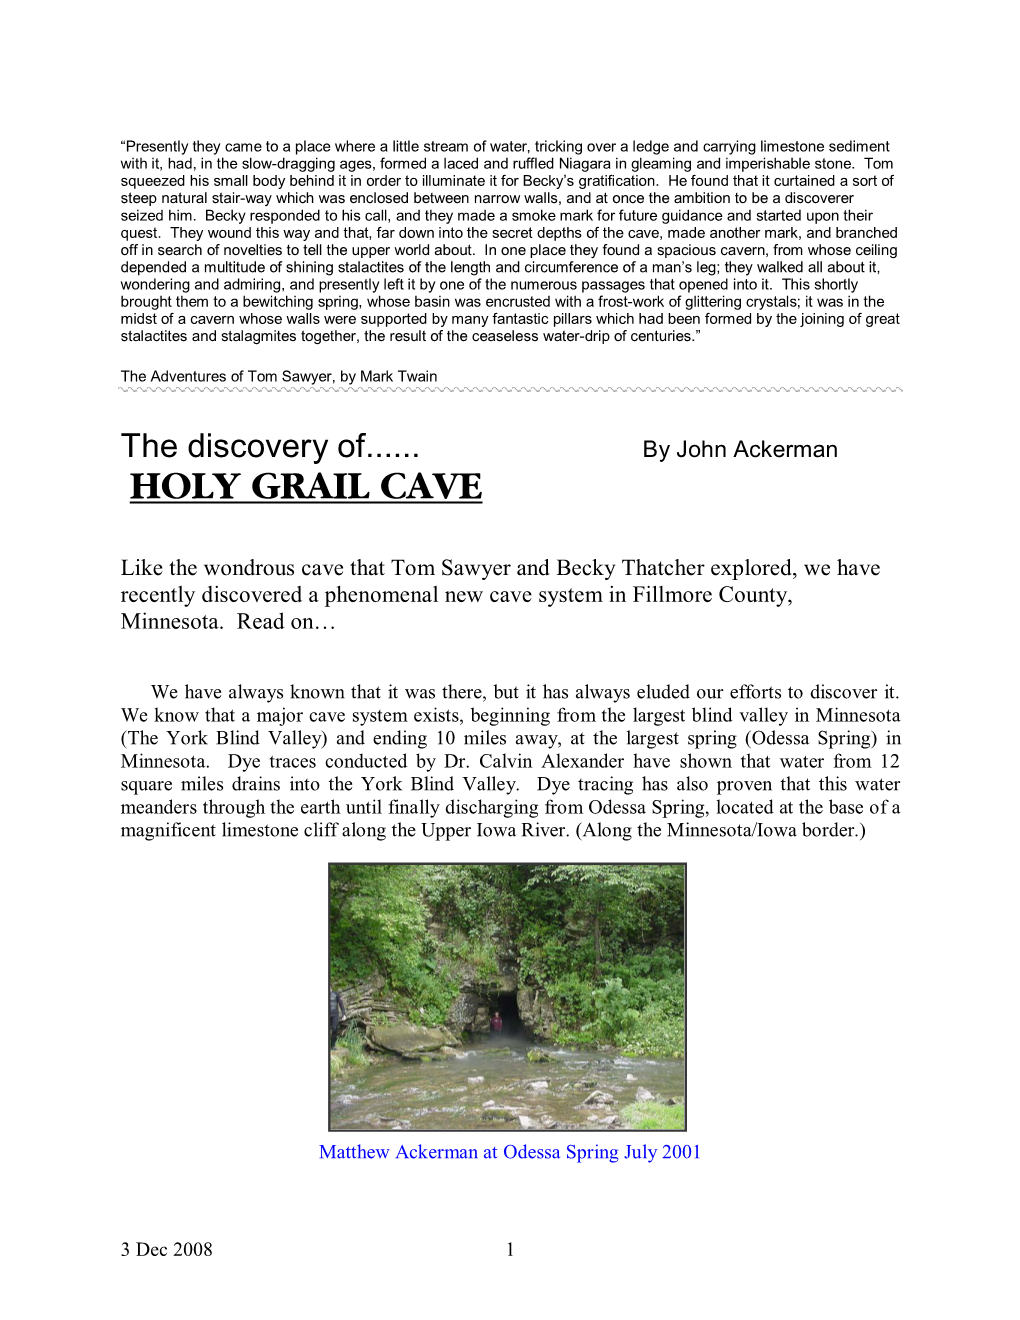 Holy Grail Cave